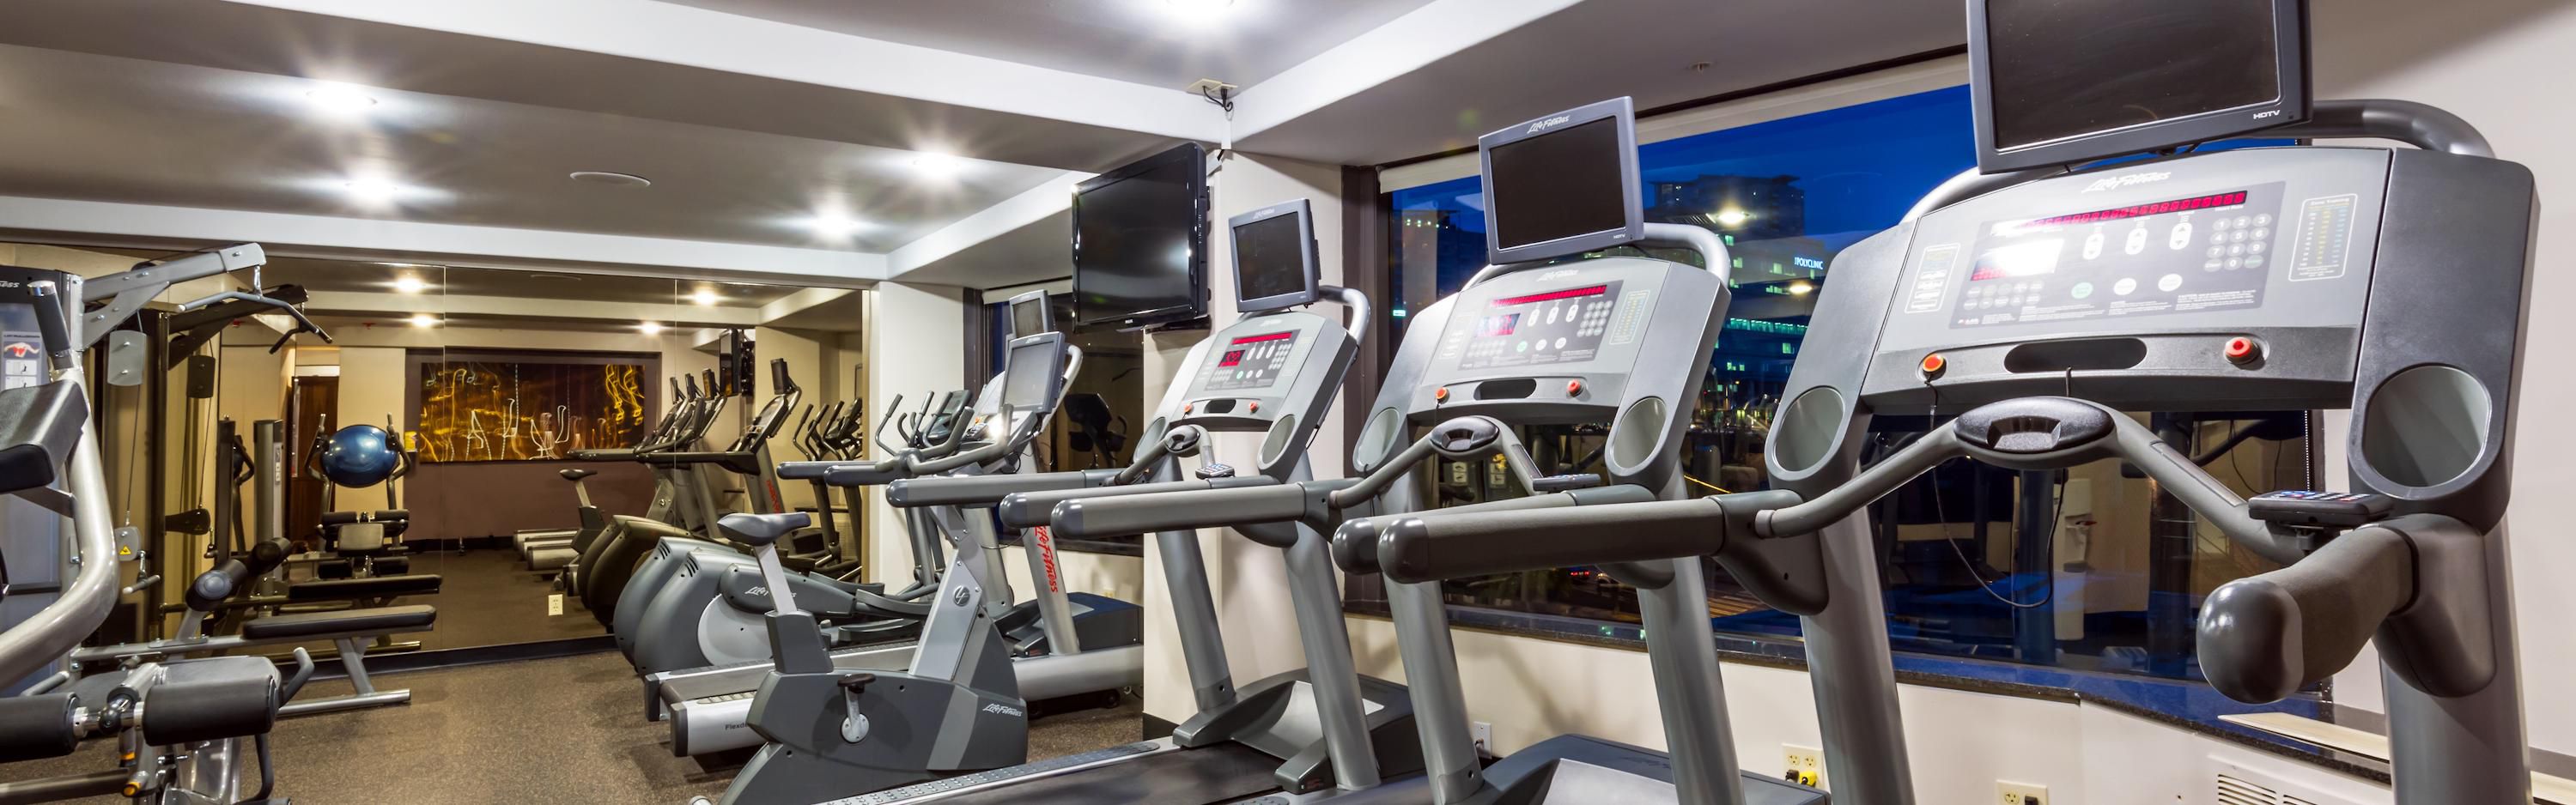 Stay Healthy using the new Cardio Equipment at the Crowne Plaza